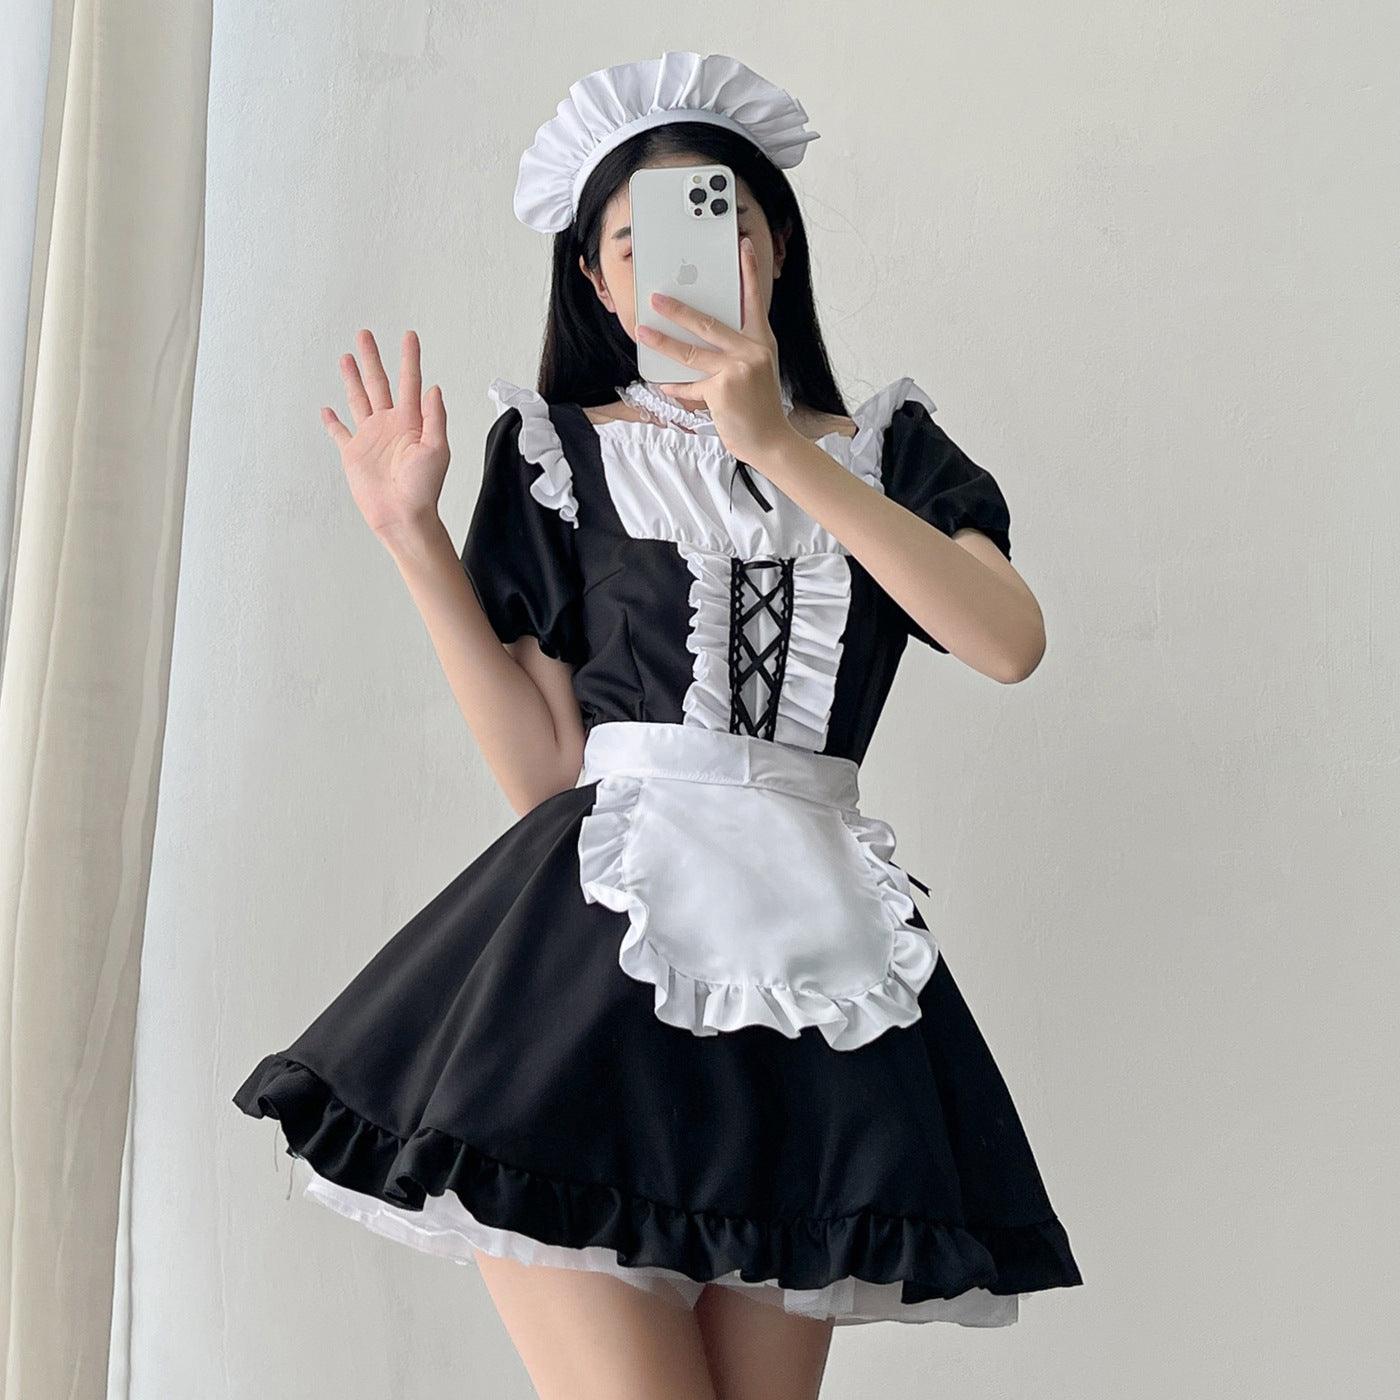 Black White Large Size Maid Outfit Lolita Dress Crossdresser for Man Woman Cosplay Costume